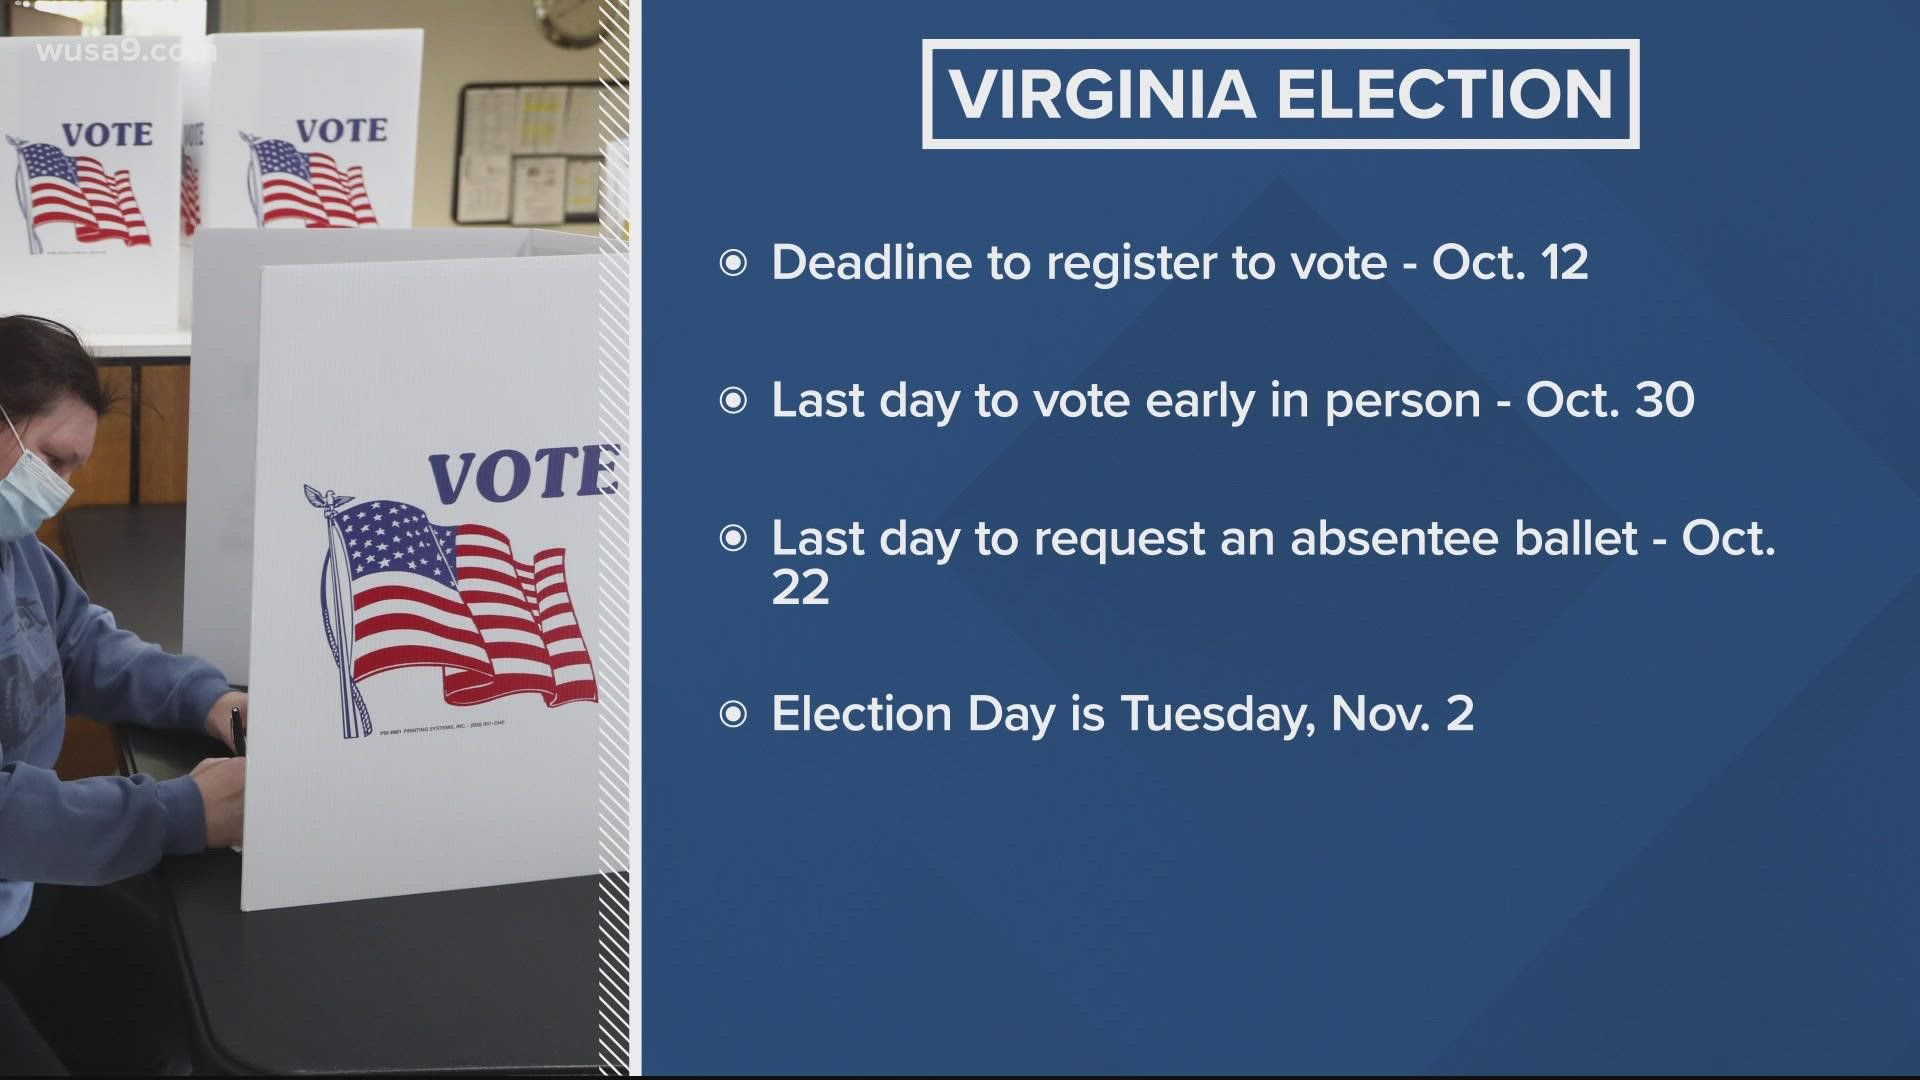 Registered voters have until Saturday, Oct. 30 to vote at early voting locations across the commonwealth.